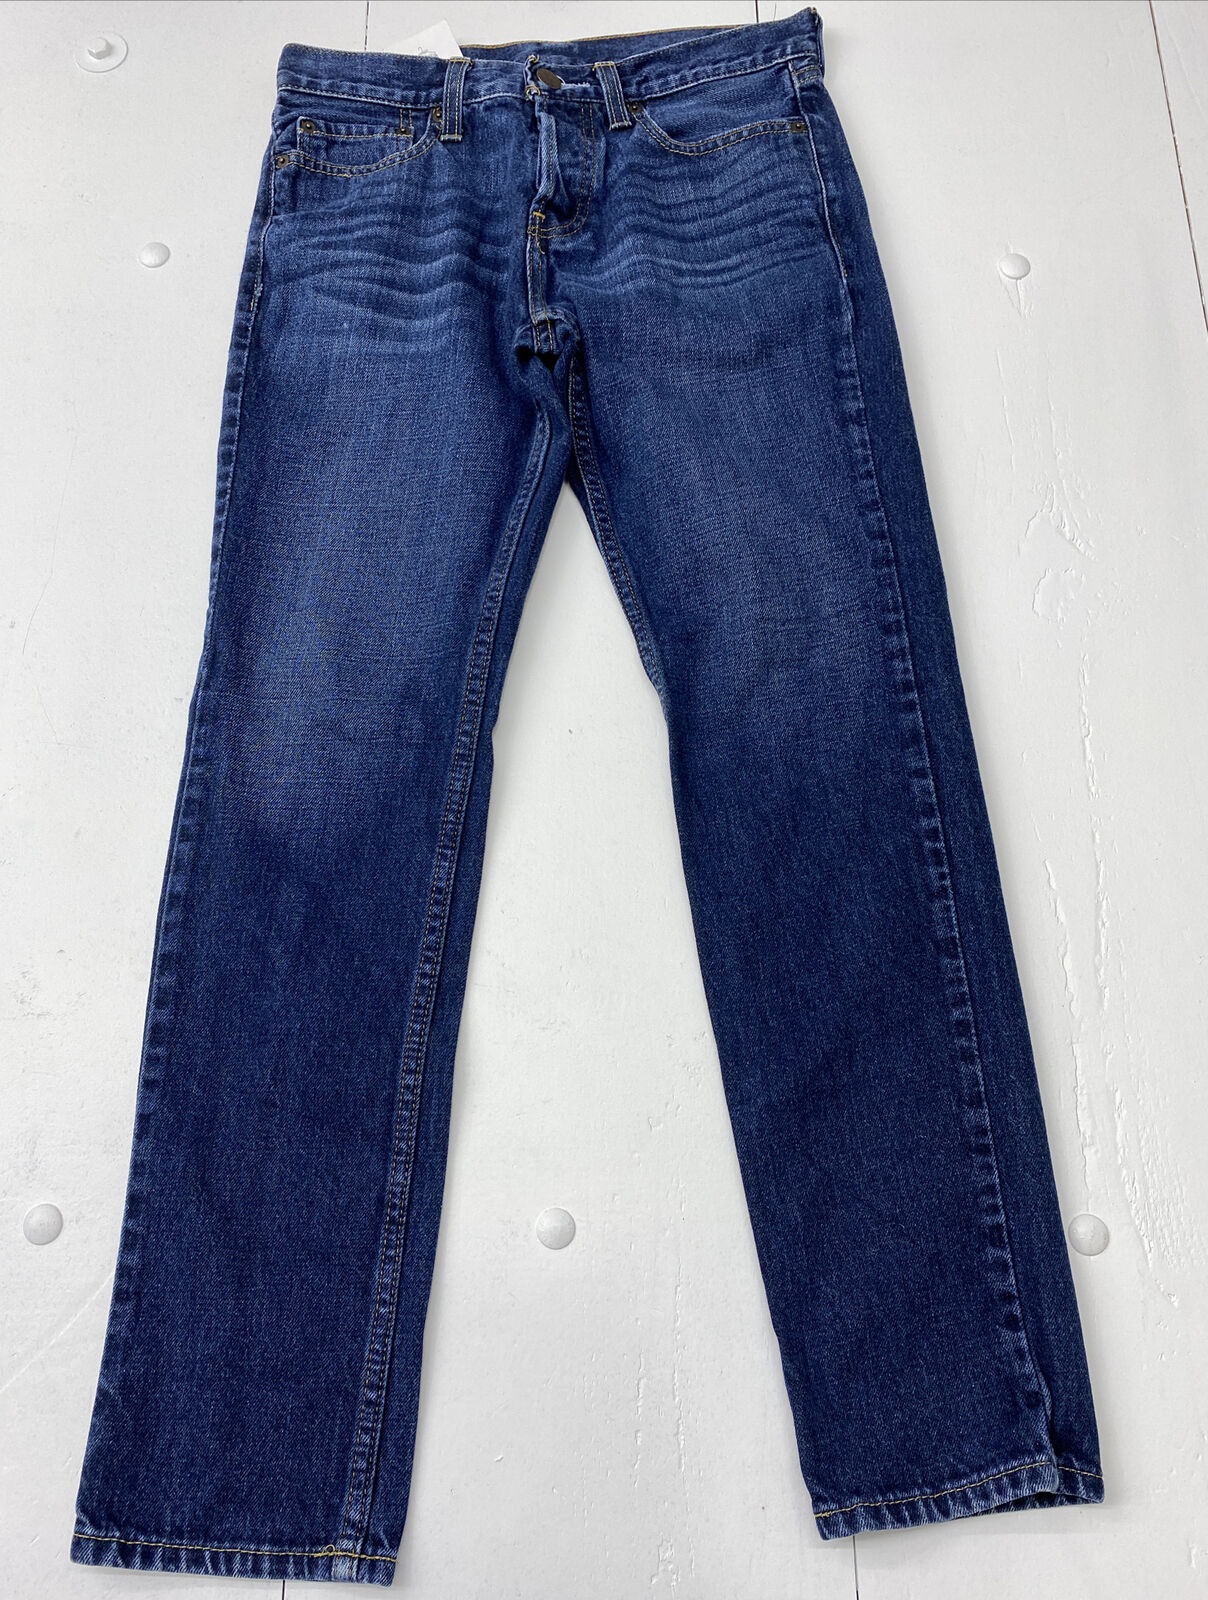 Hollister The Hollister Skinny Button Fly Jeans Men's Size 29X30